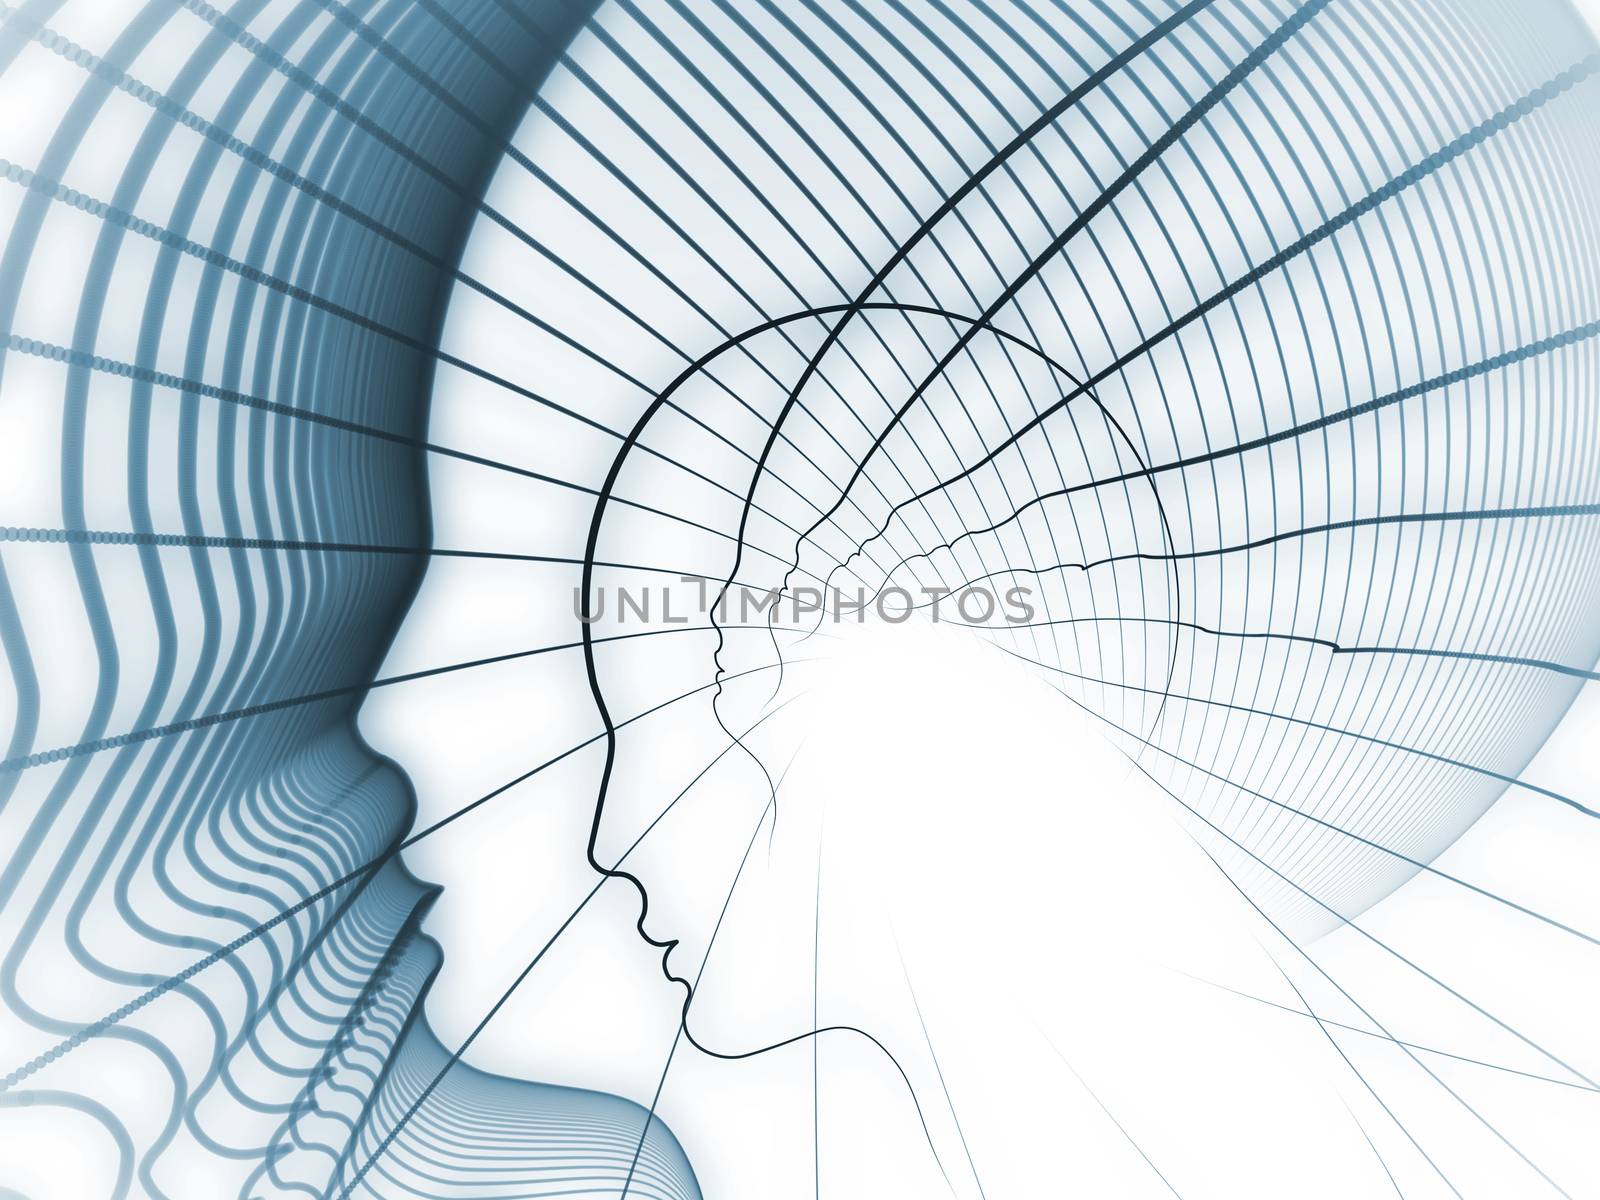 Geometry of Soul series. Abstract composition of profile lines of human head suitable as element in projects related to education, science, technology and graphic design